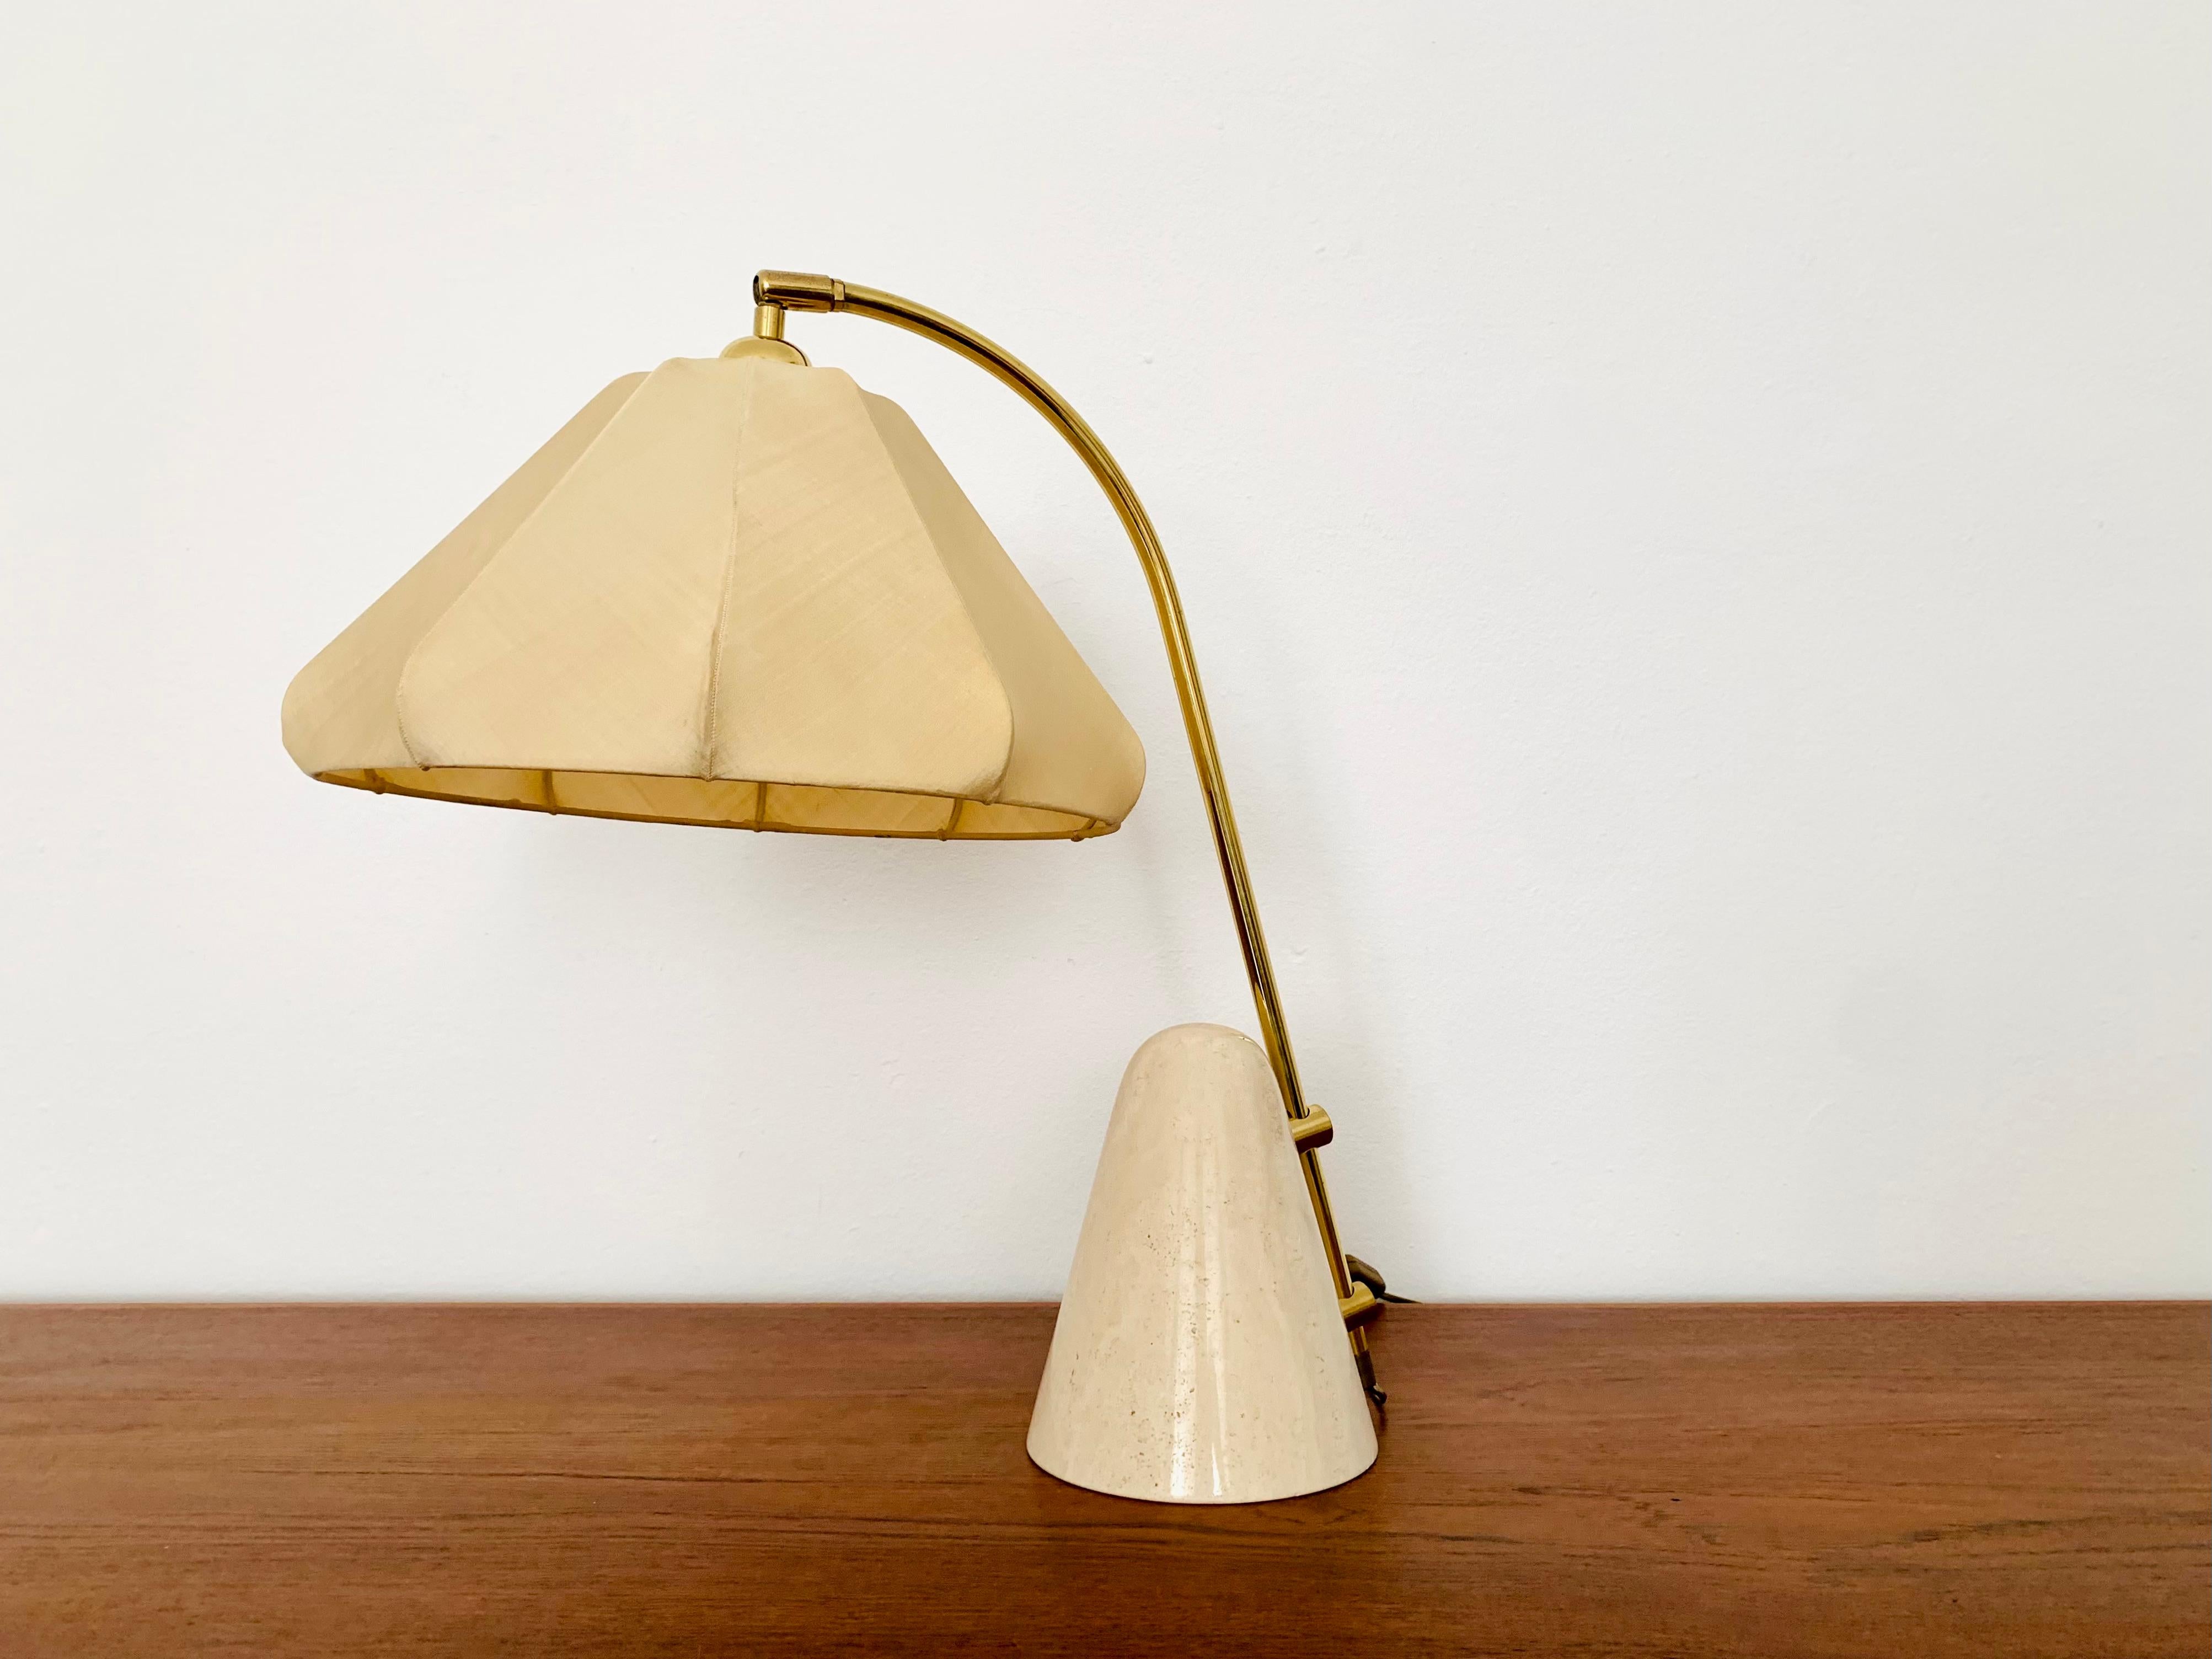 Wonderful table lamp from the 1960s.
Extremely high -quality workmanship and very nice design.
The materials used such as brass and travertine are very noble.
A very cozy light is created.

Manufacturer: Temde

Condition:

Very good vintage